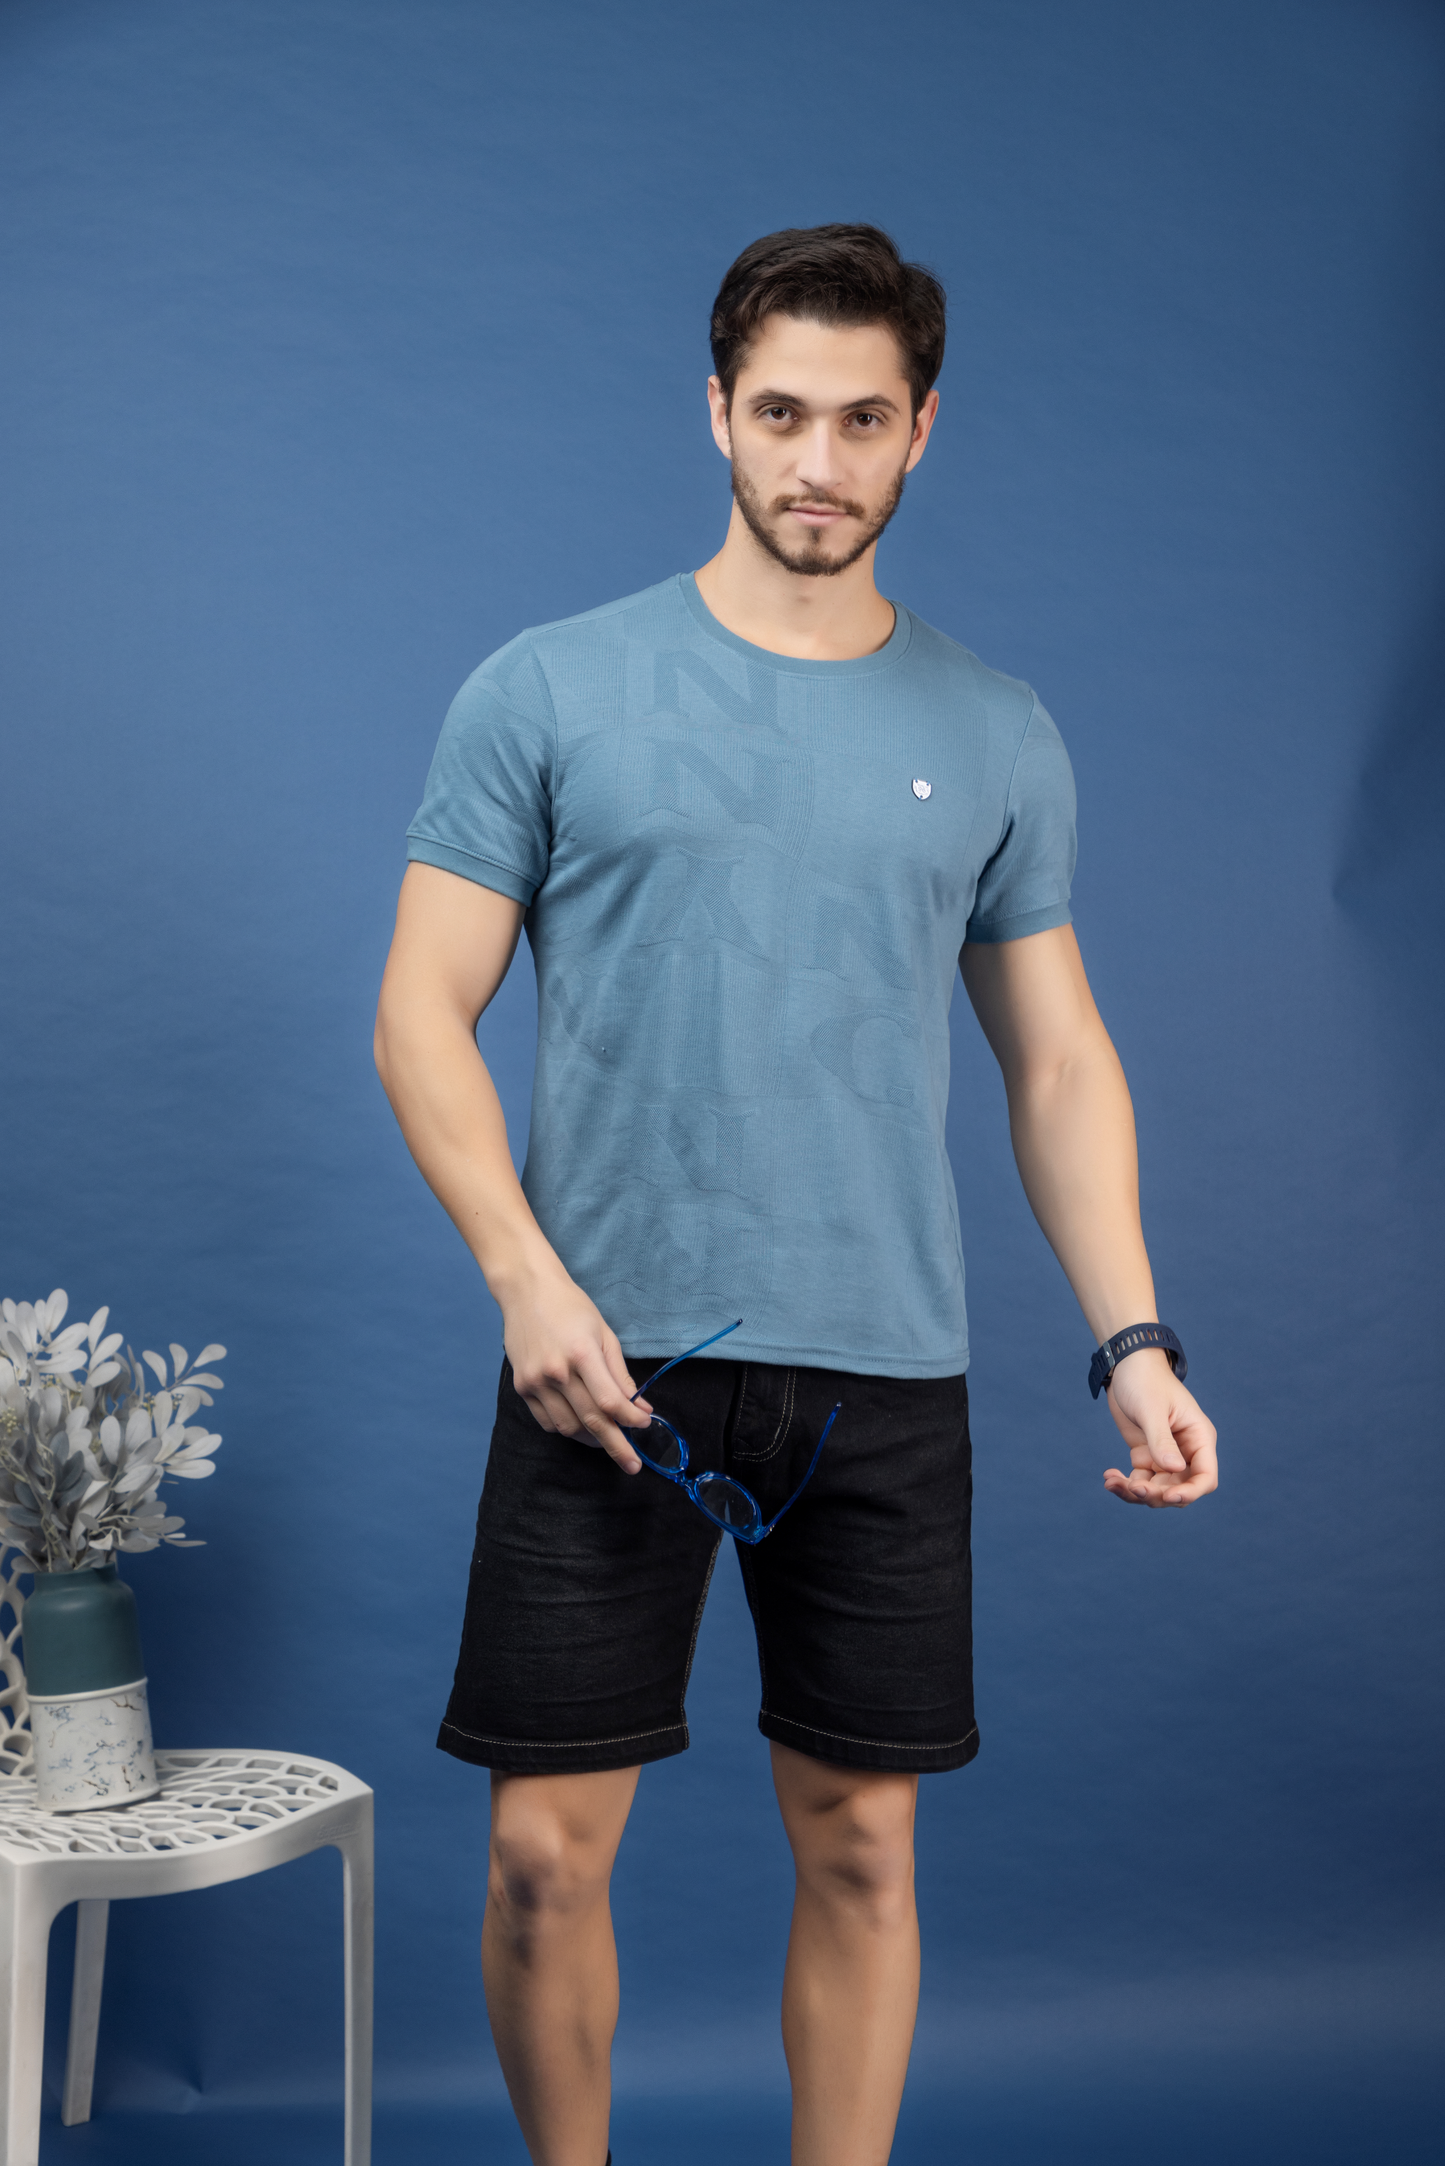 3 Tee's - Essentials Relaxed Fit Tee Combo